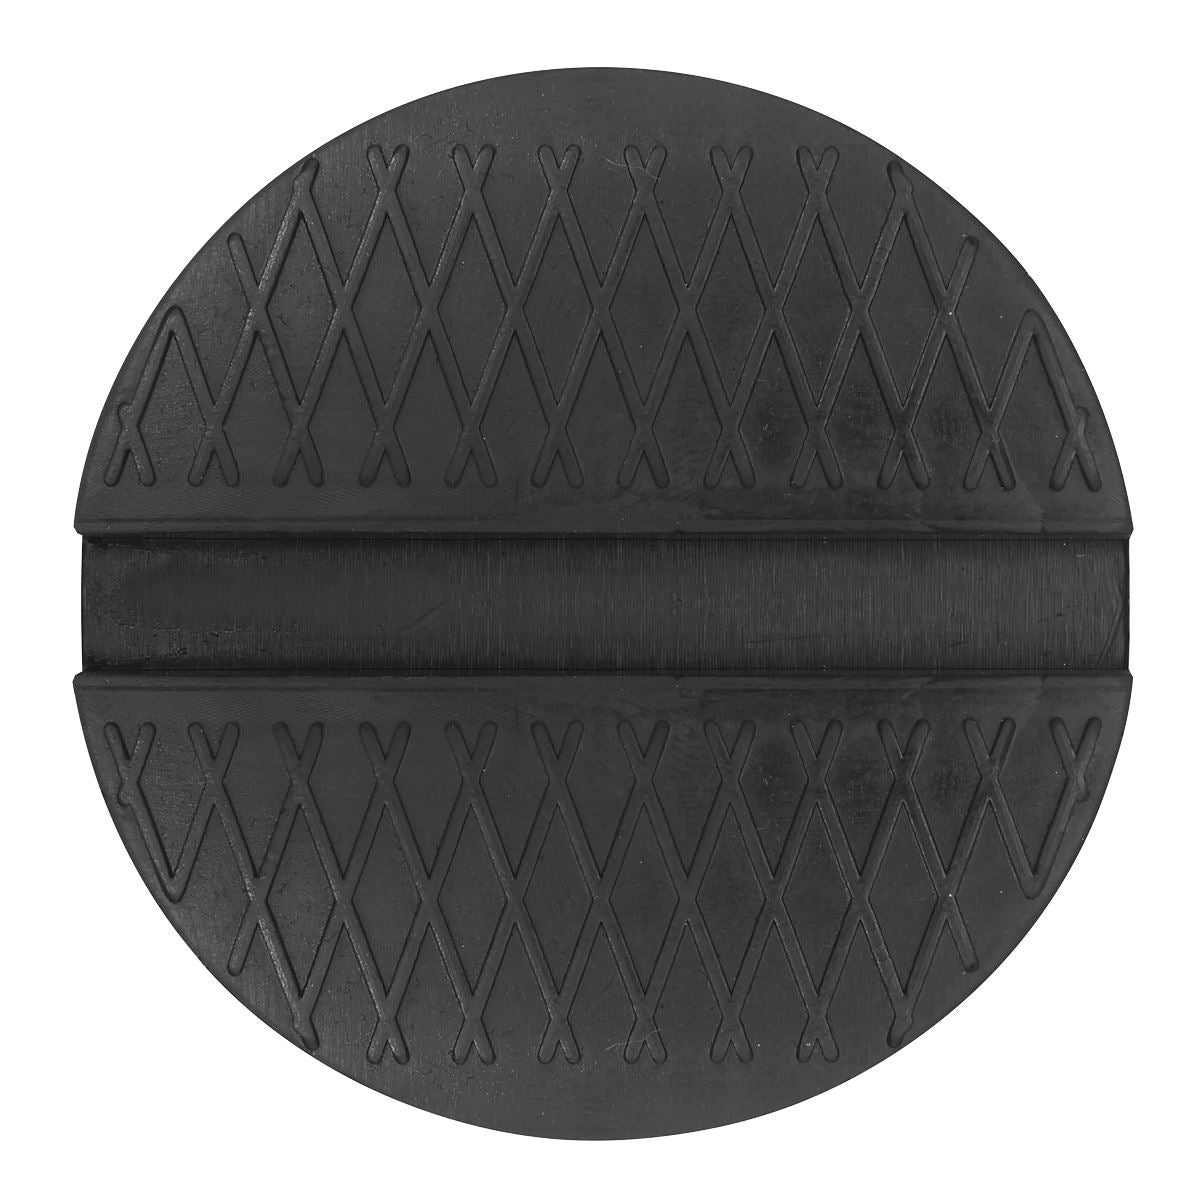 Sealey Slotted Pinch Weld Jacking Pad - Universal